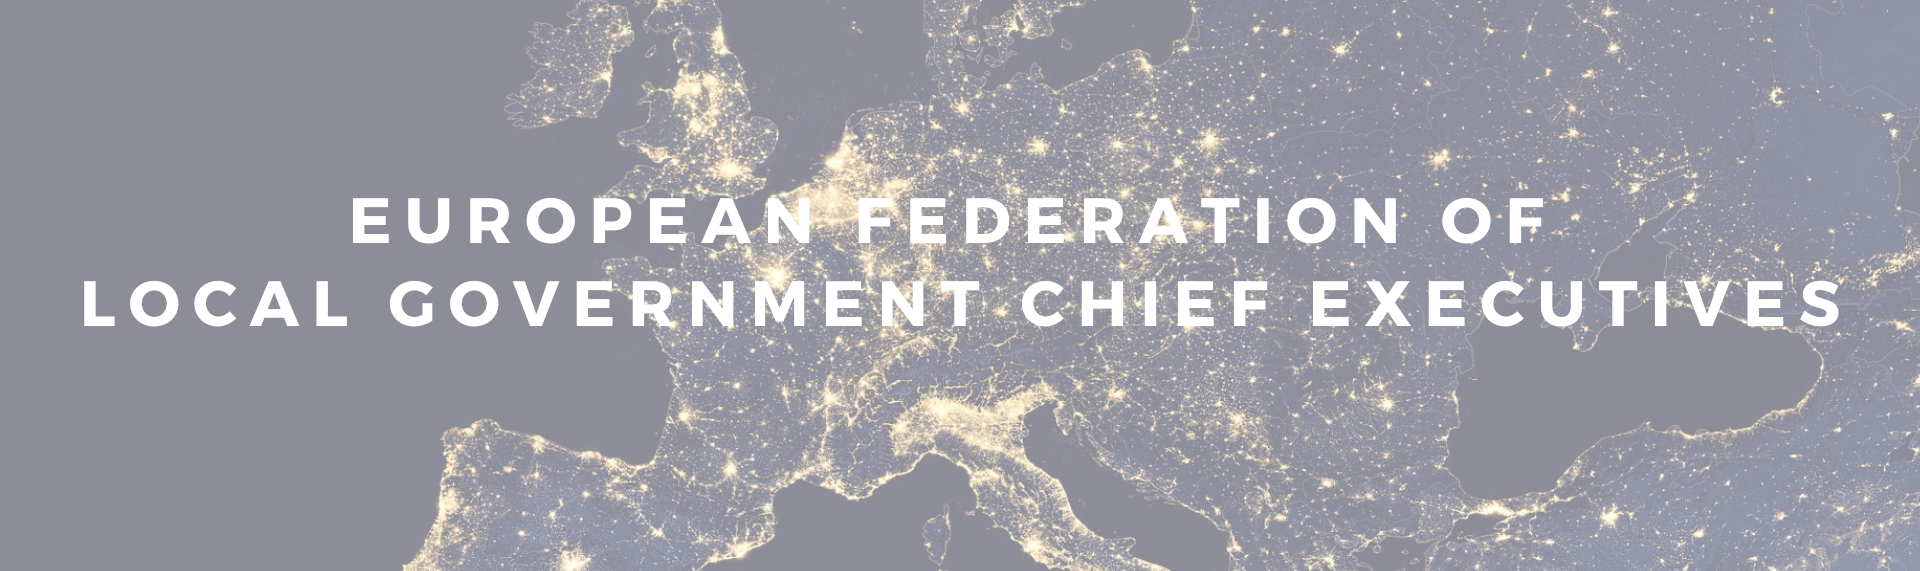 European Federation of Local Government Chief Executives